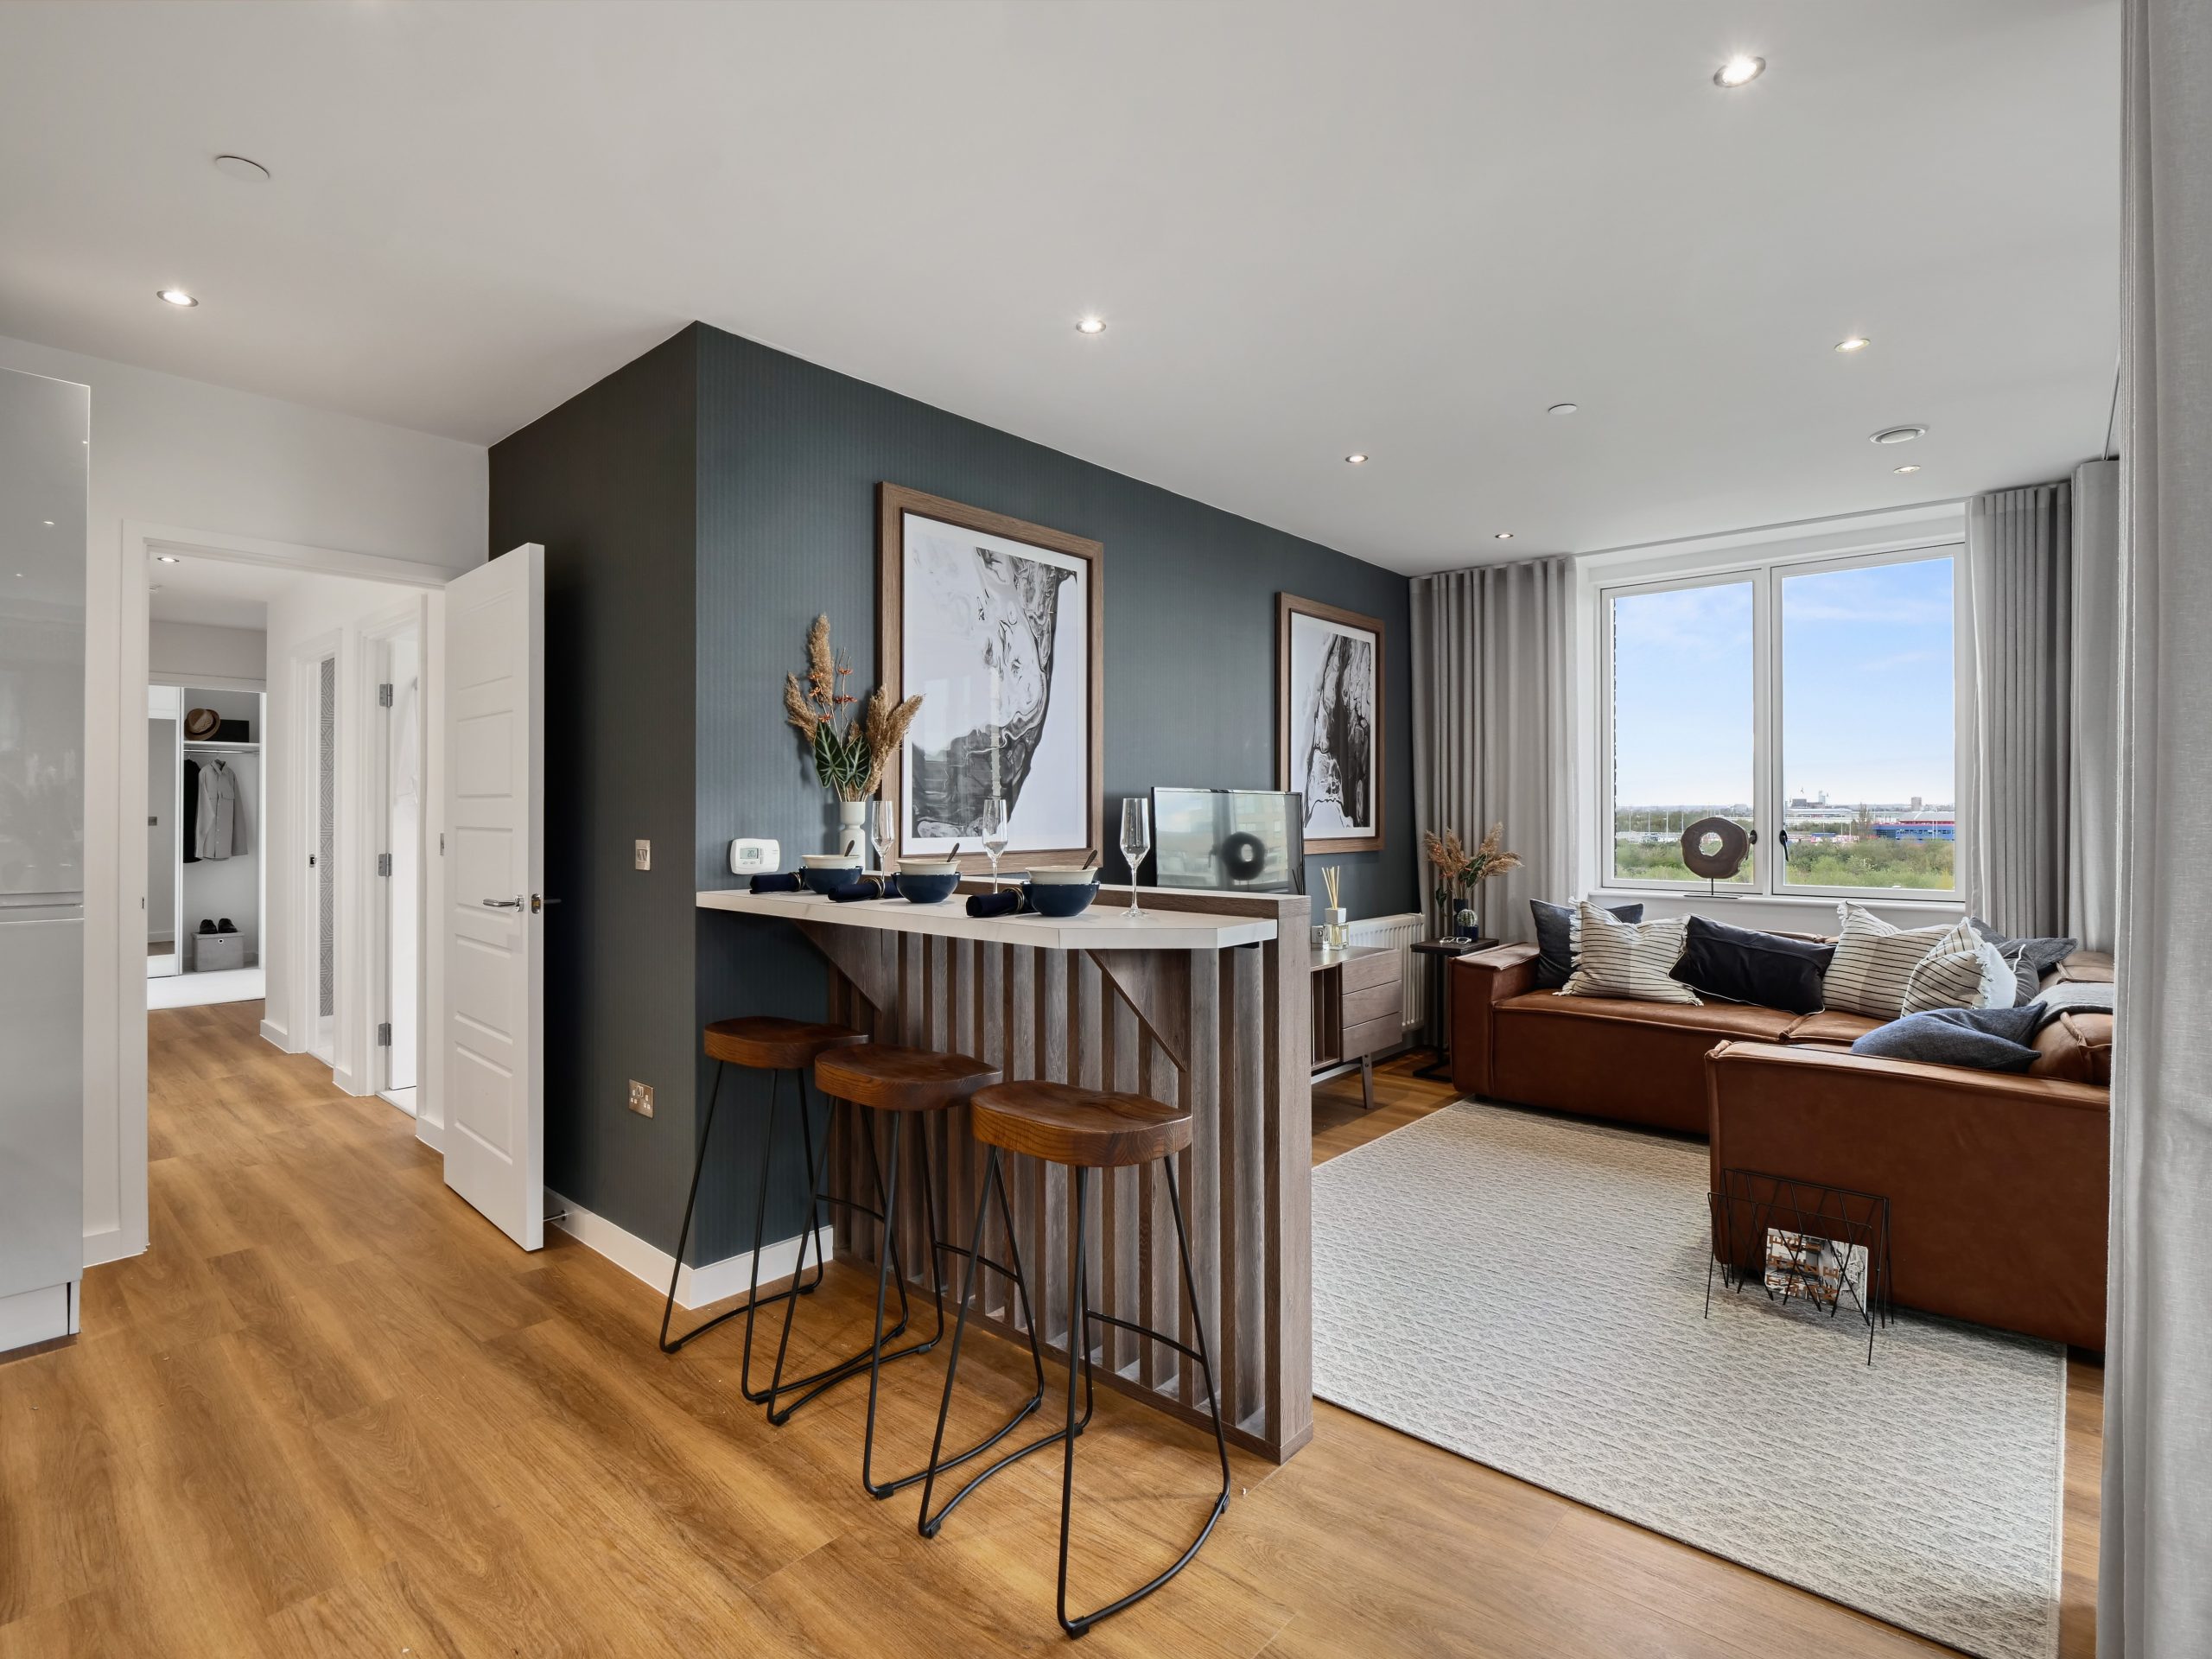 pps002 scaled 1 1 Picture Perfect Show Apartment Unveiled at Remarkable Royal Docks Development